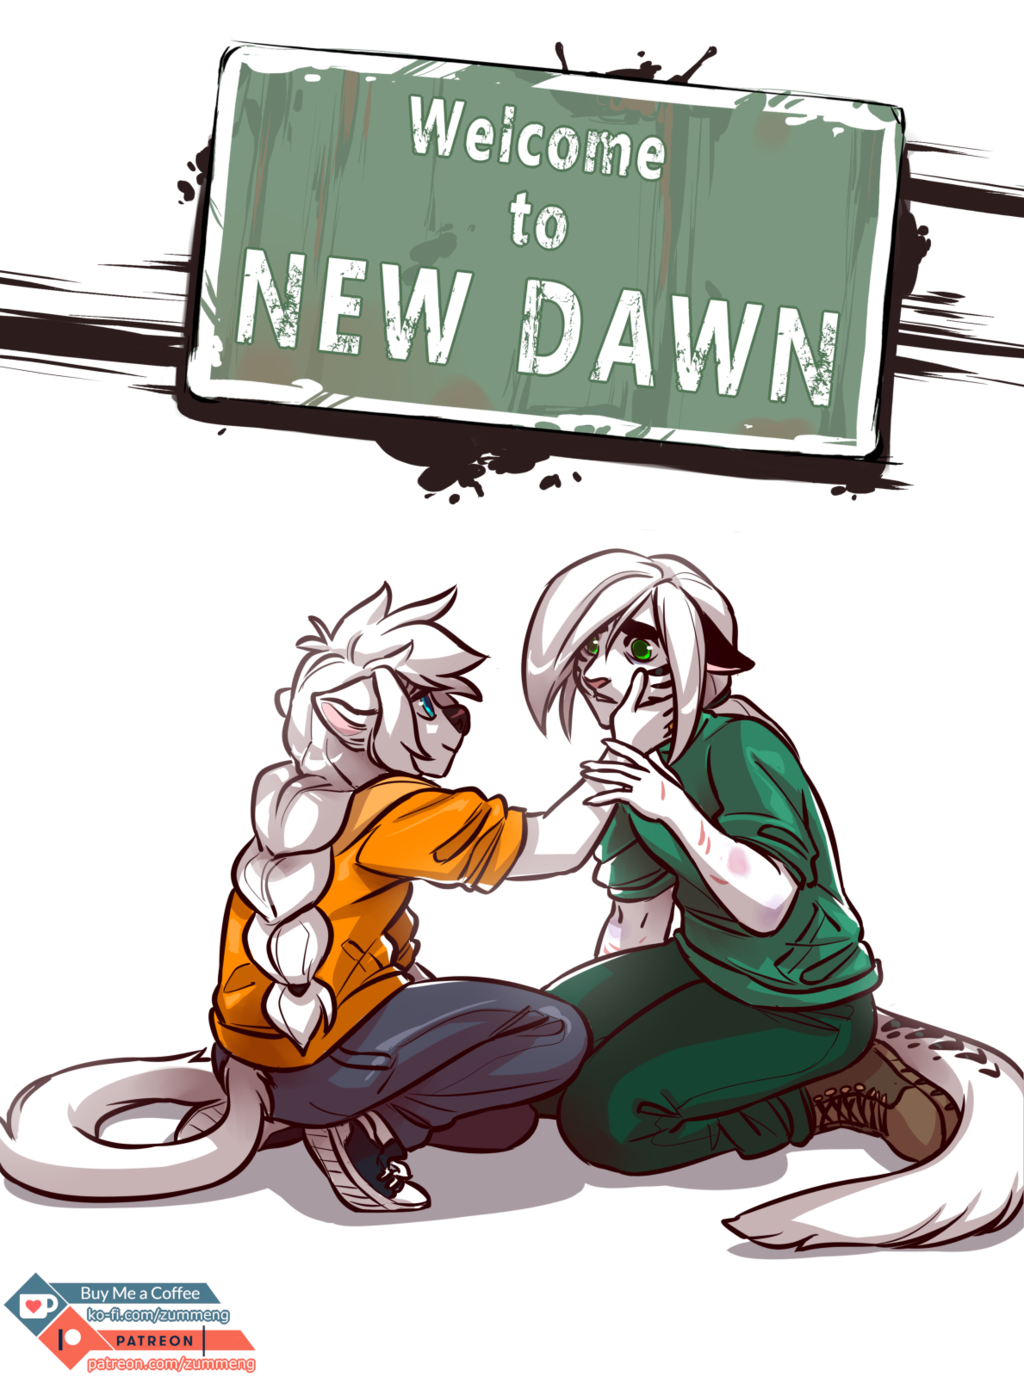 Welcome to New Dawn pg. 59.